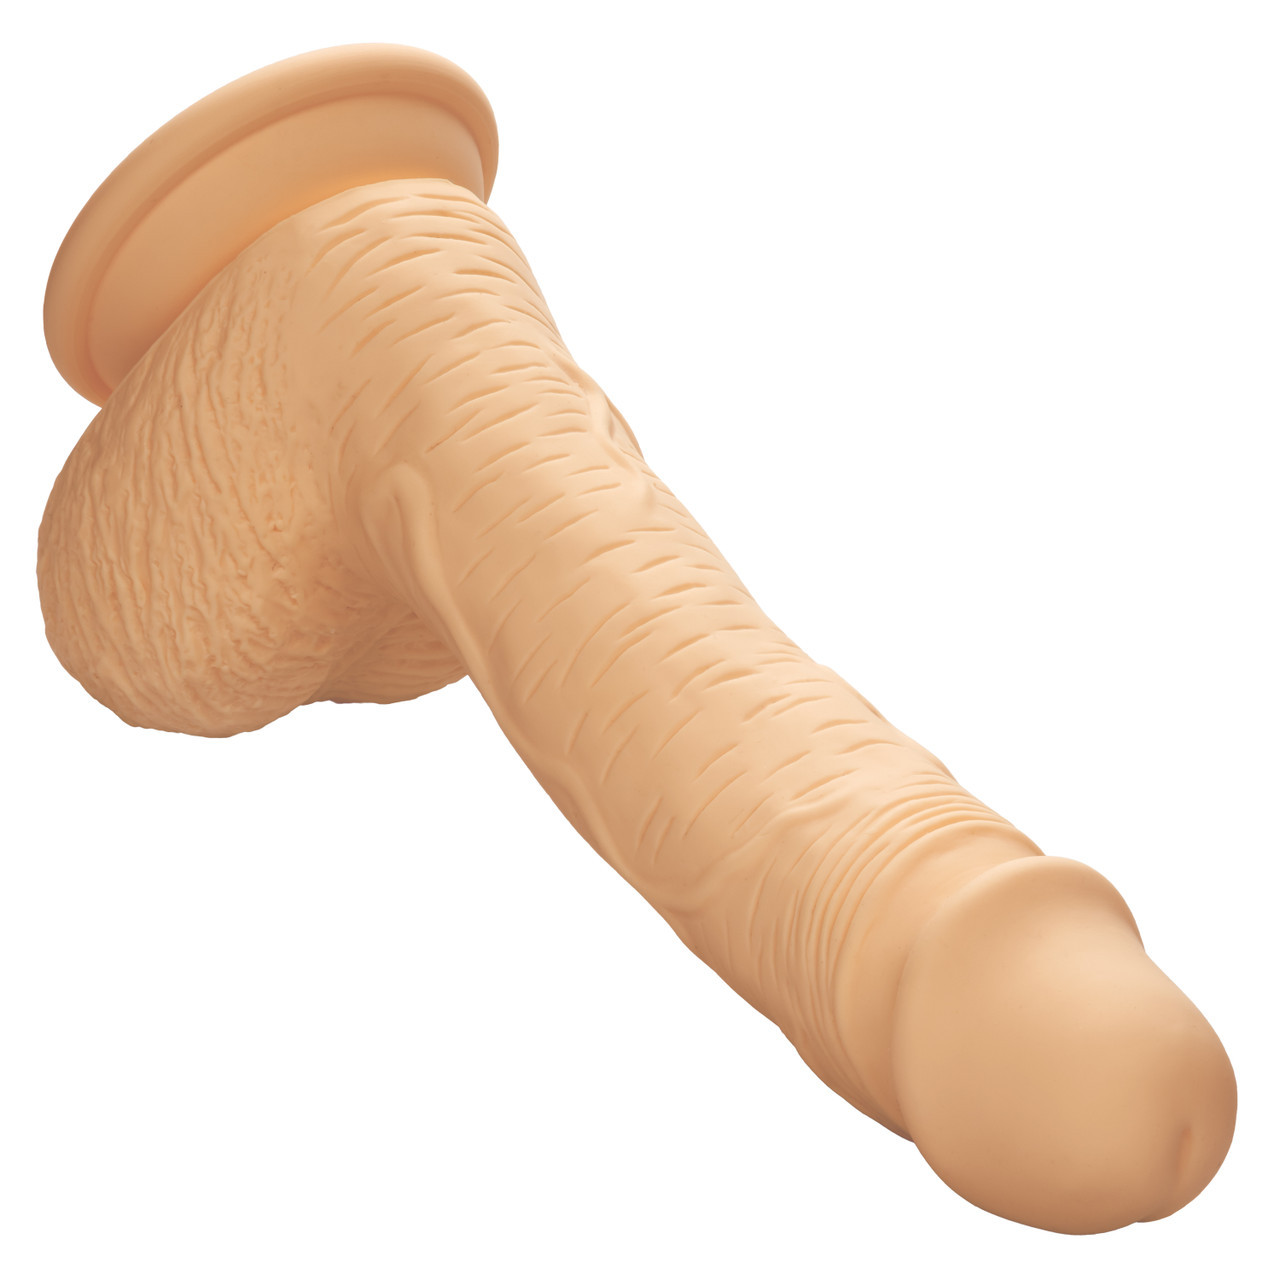 Dual Density Silicone Stud Dildo 6.25 inch | Realistic Dildos from Condom Depot